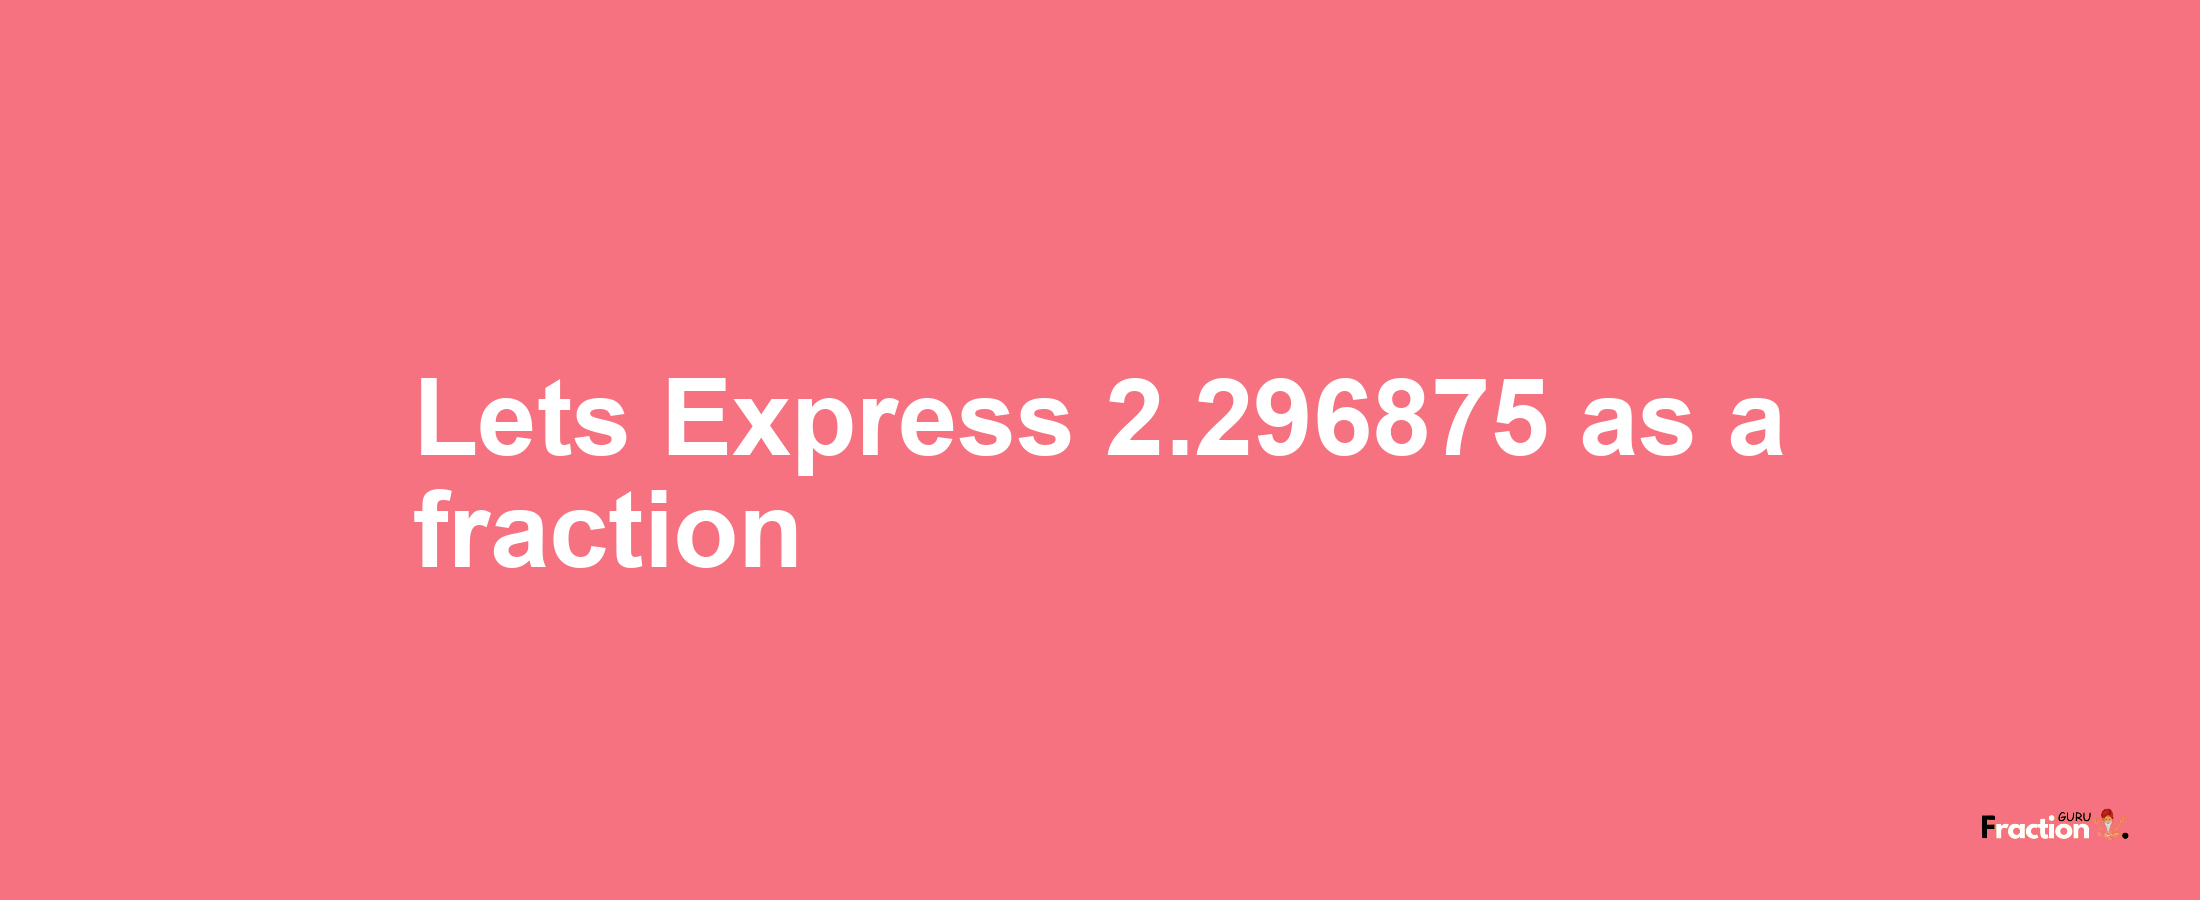 Lets Express 2.296875 as afraction